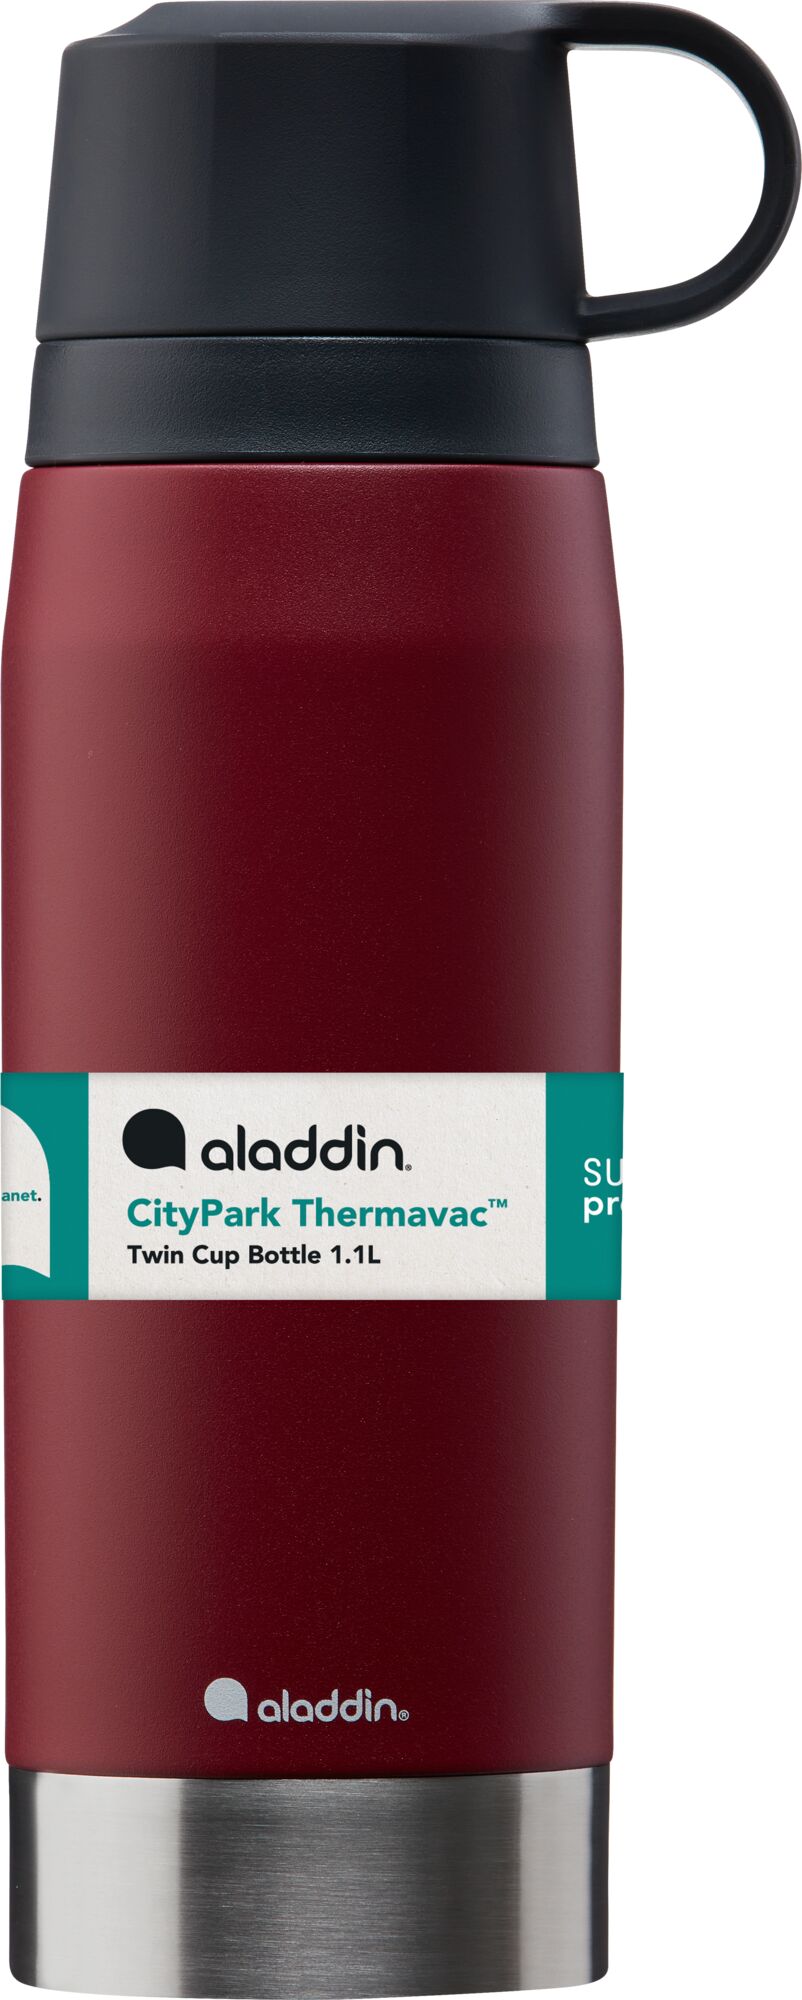 CityPark Thermavac Twin Cup Bottle 1.1L BURGUNDY RED